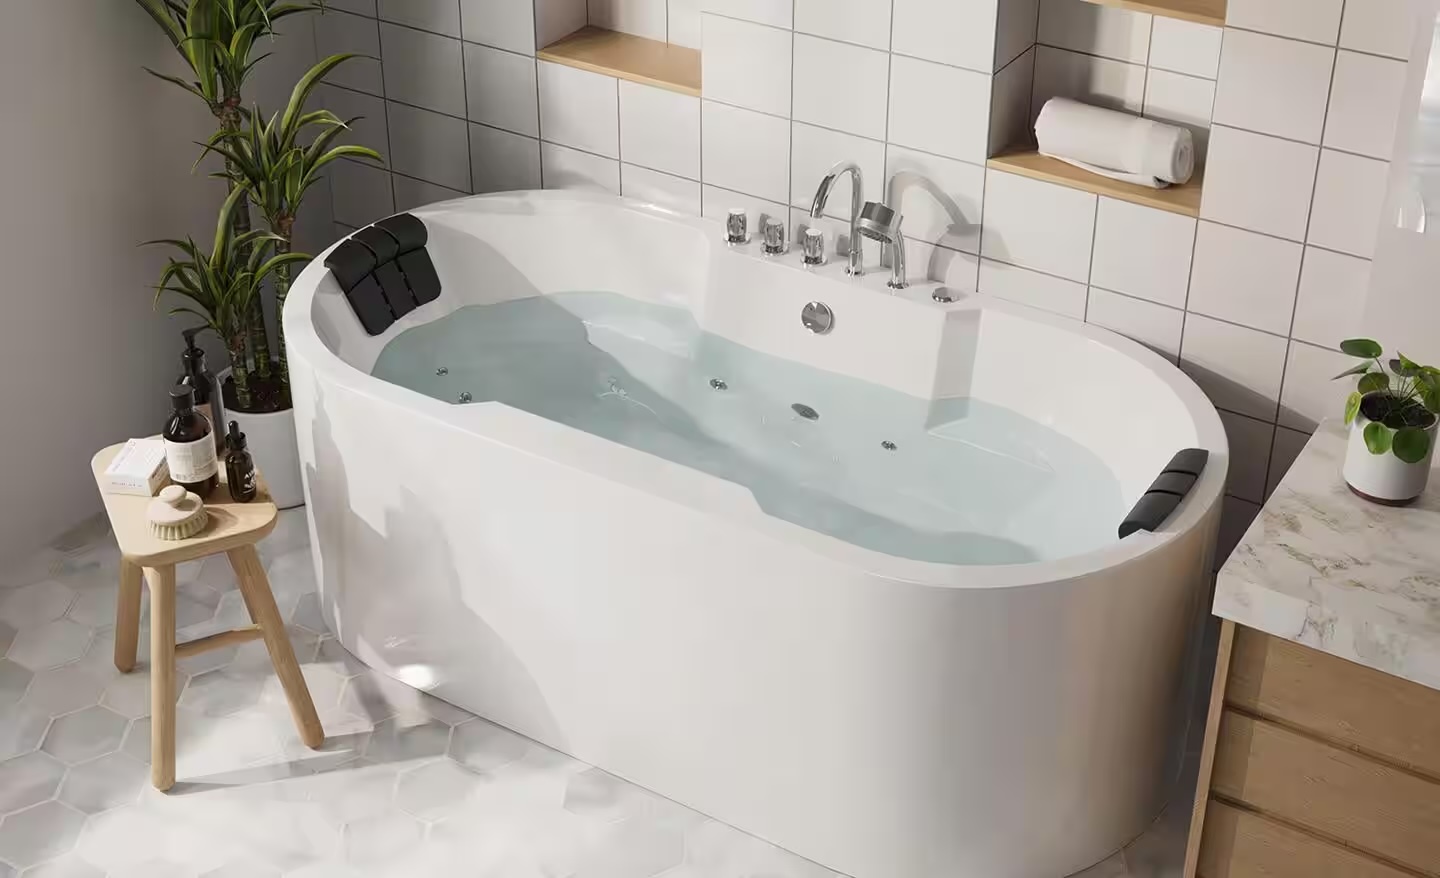 How Many Square Feet Is A Bathtub Surround?